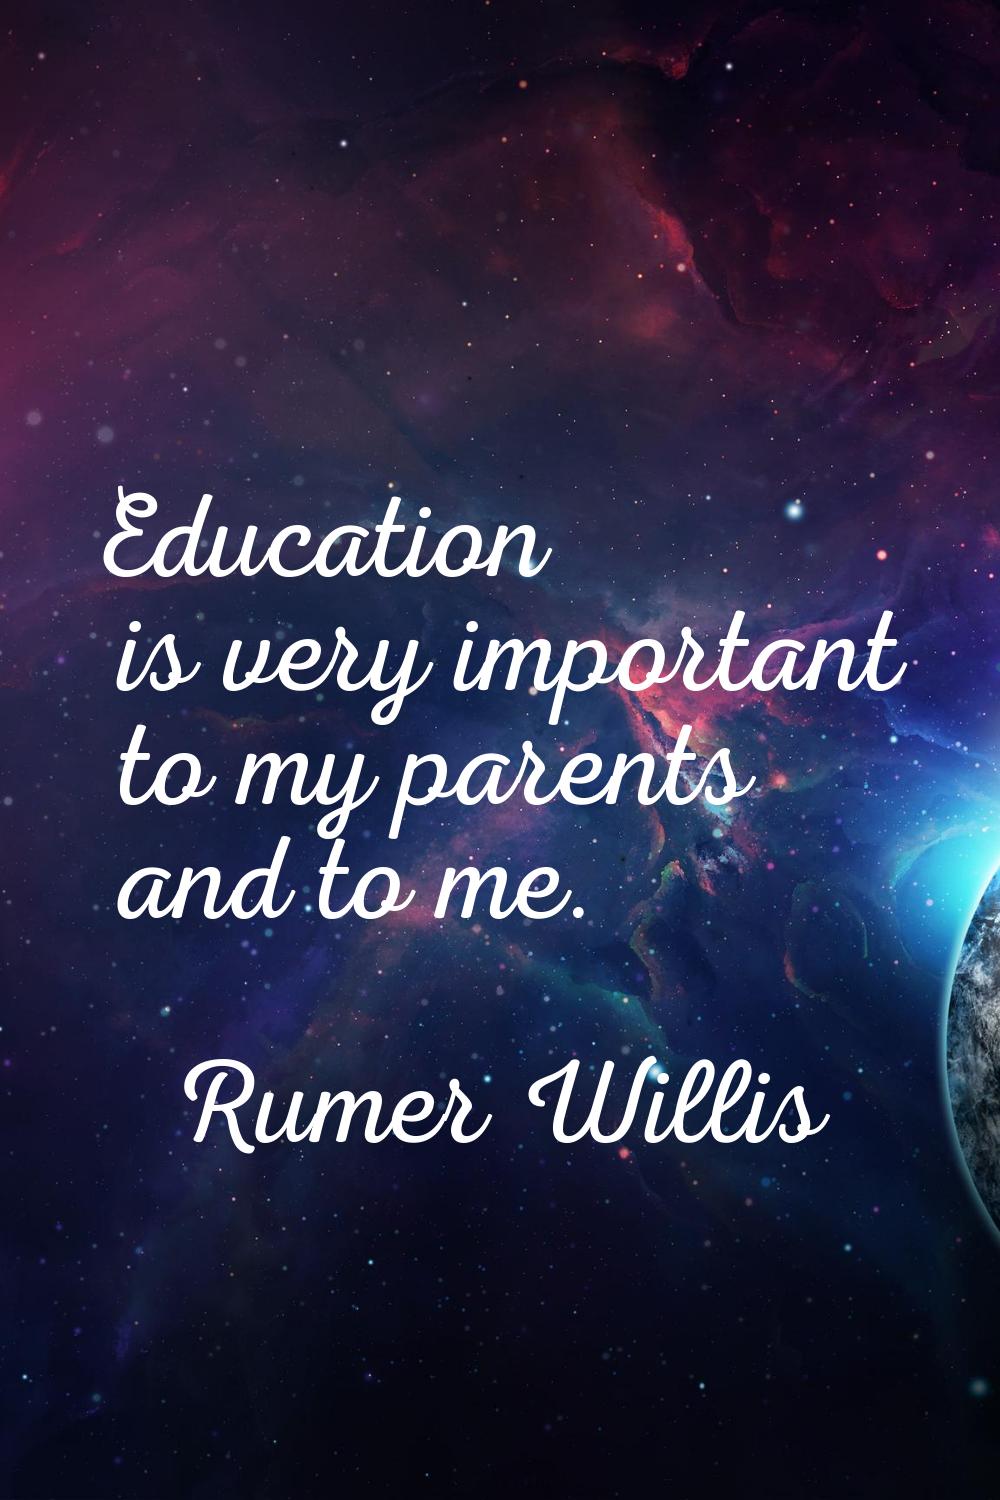 Education is very important to my parents and to me.